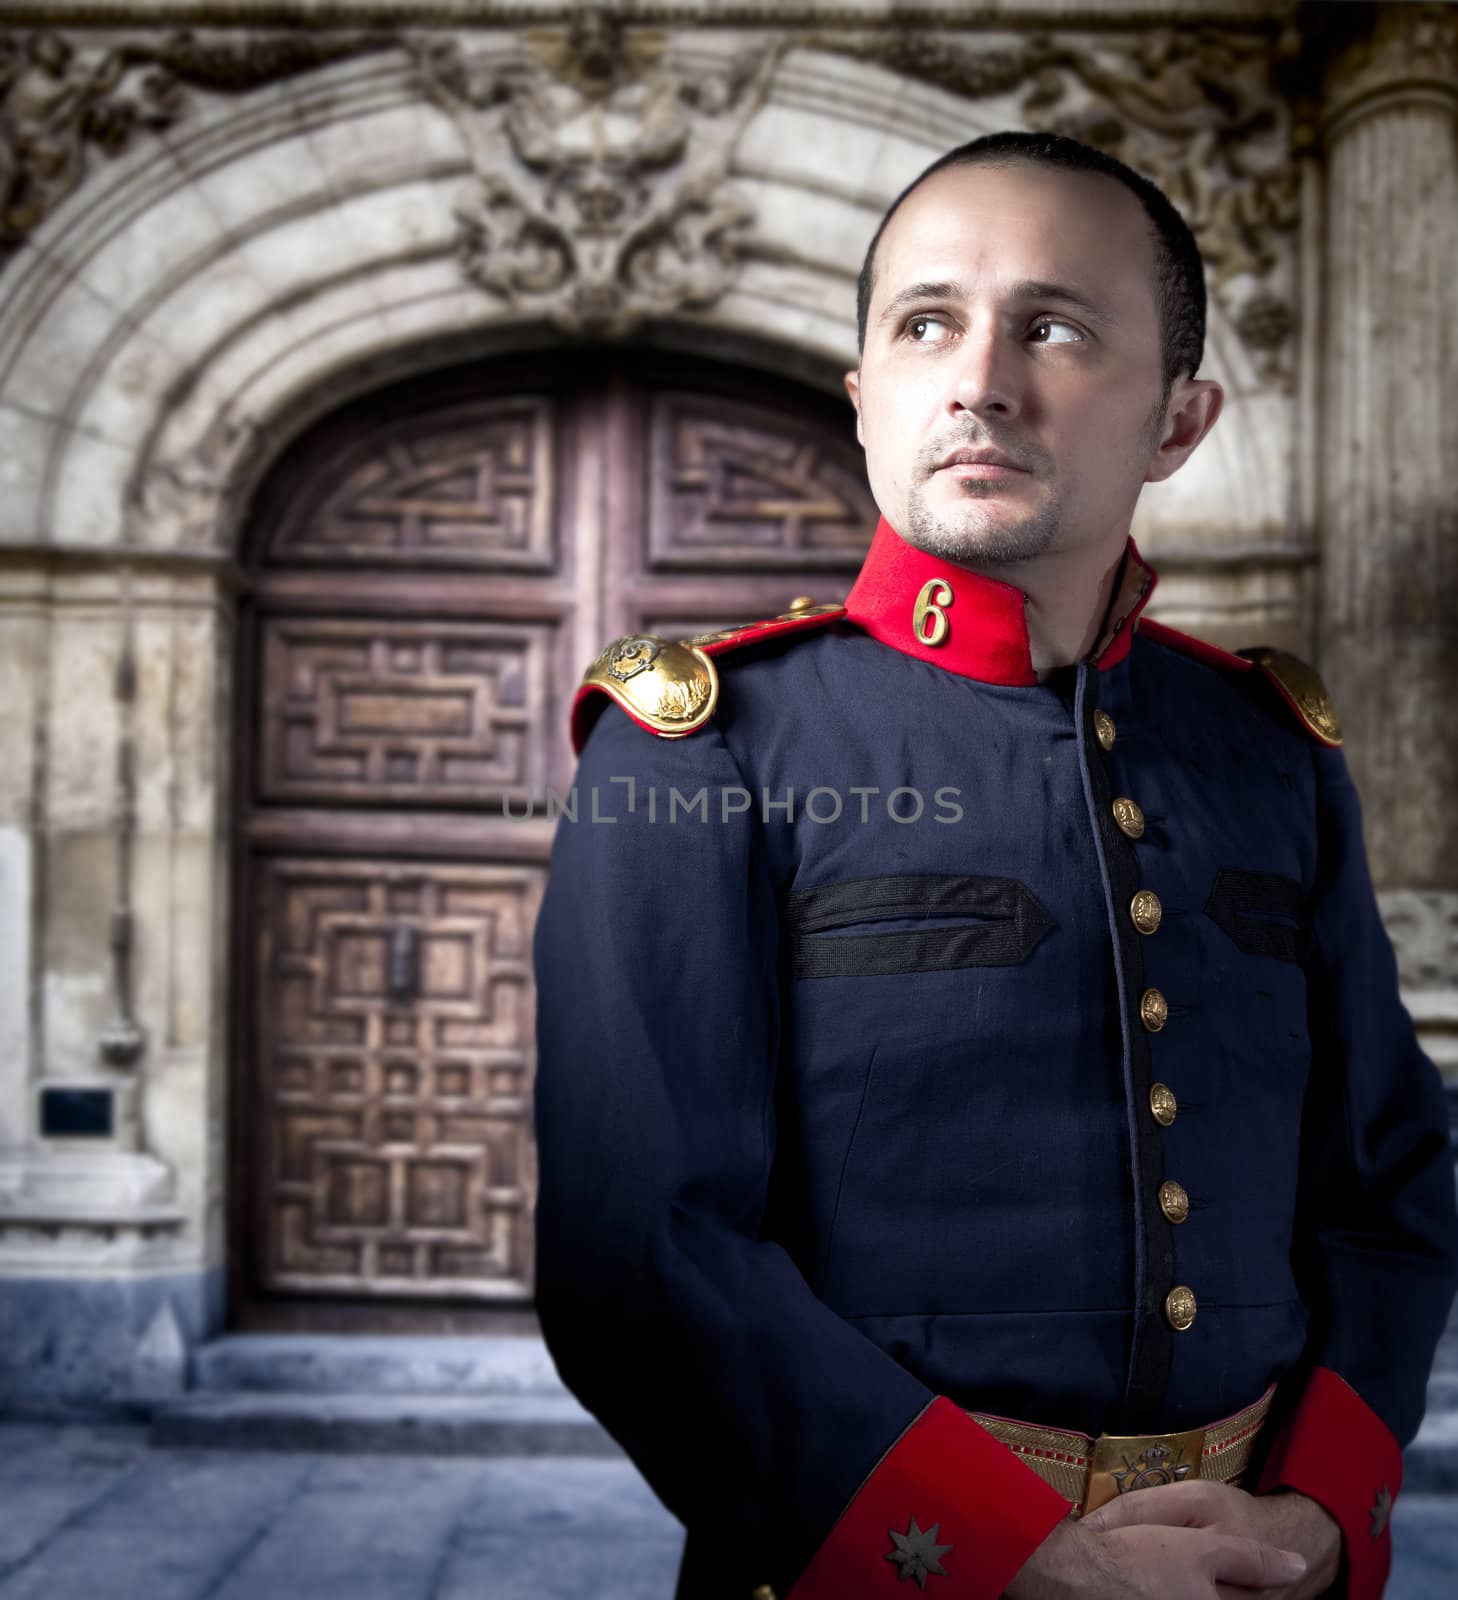 Antique soldier, man with military costume palace at background